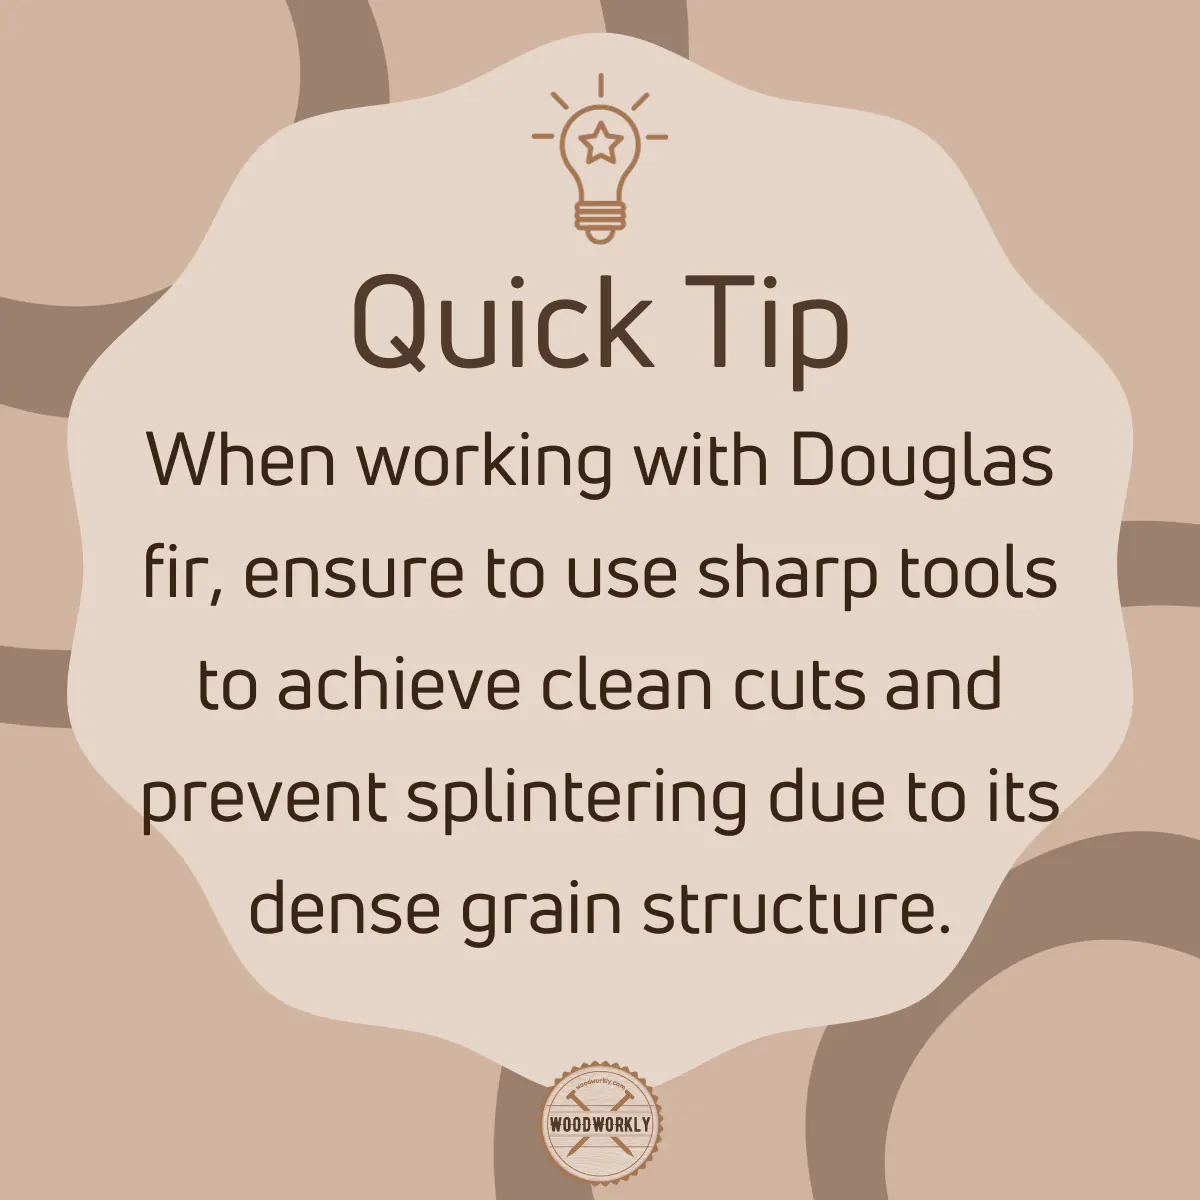 Tip for working with Douglas fir